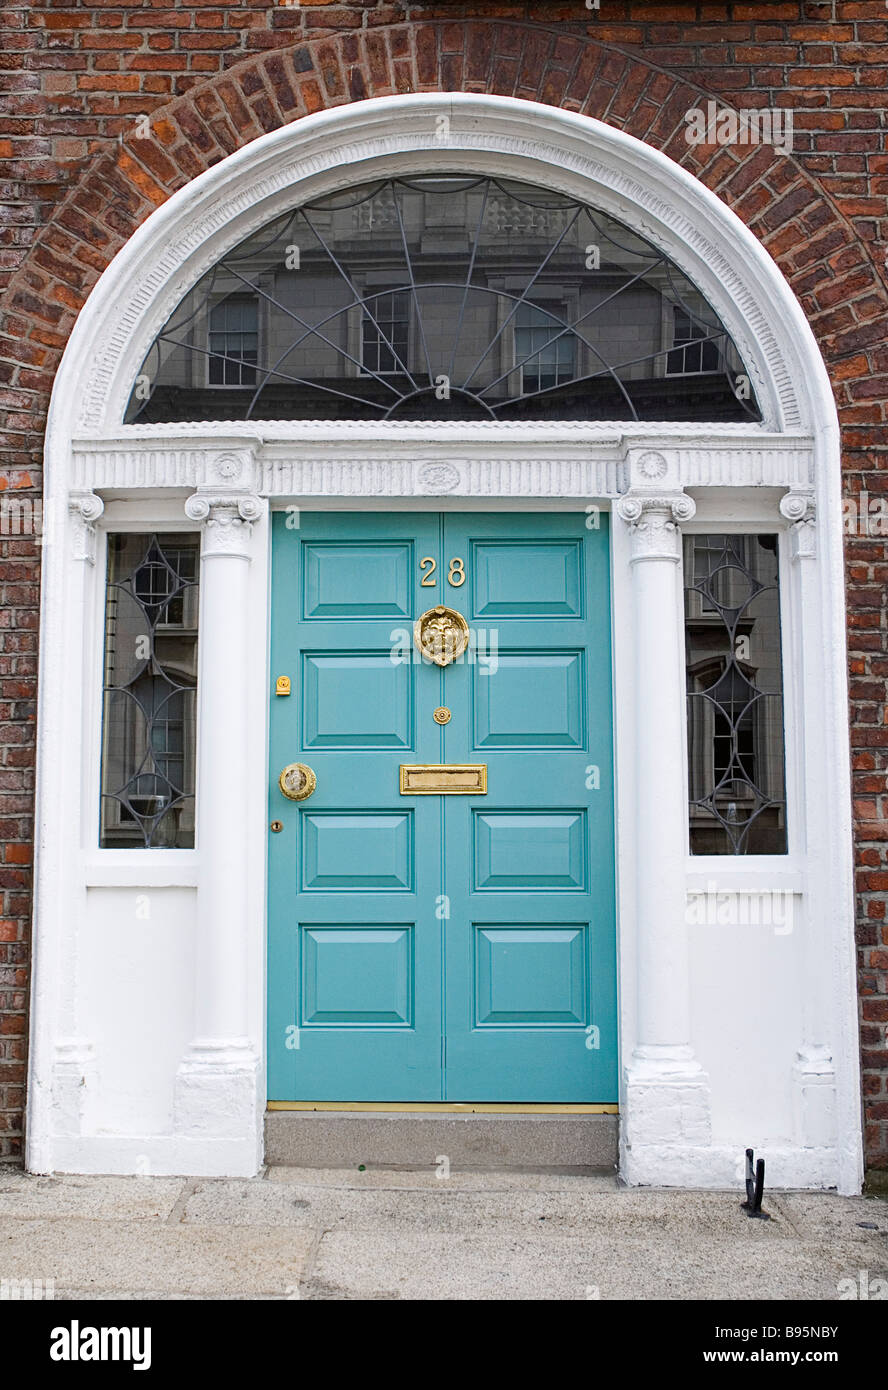 Ireland, Dublin, Georgian doorway near Merrion Square with turquoise painted door and white surround with glass insets. Stock Photo